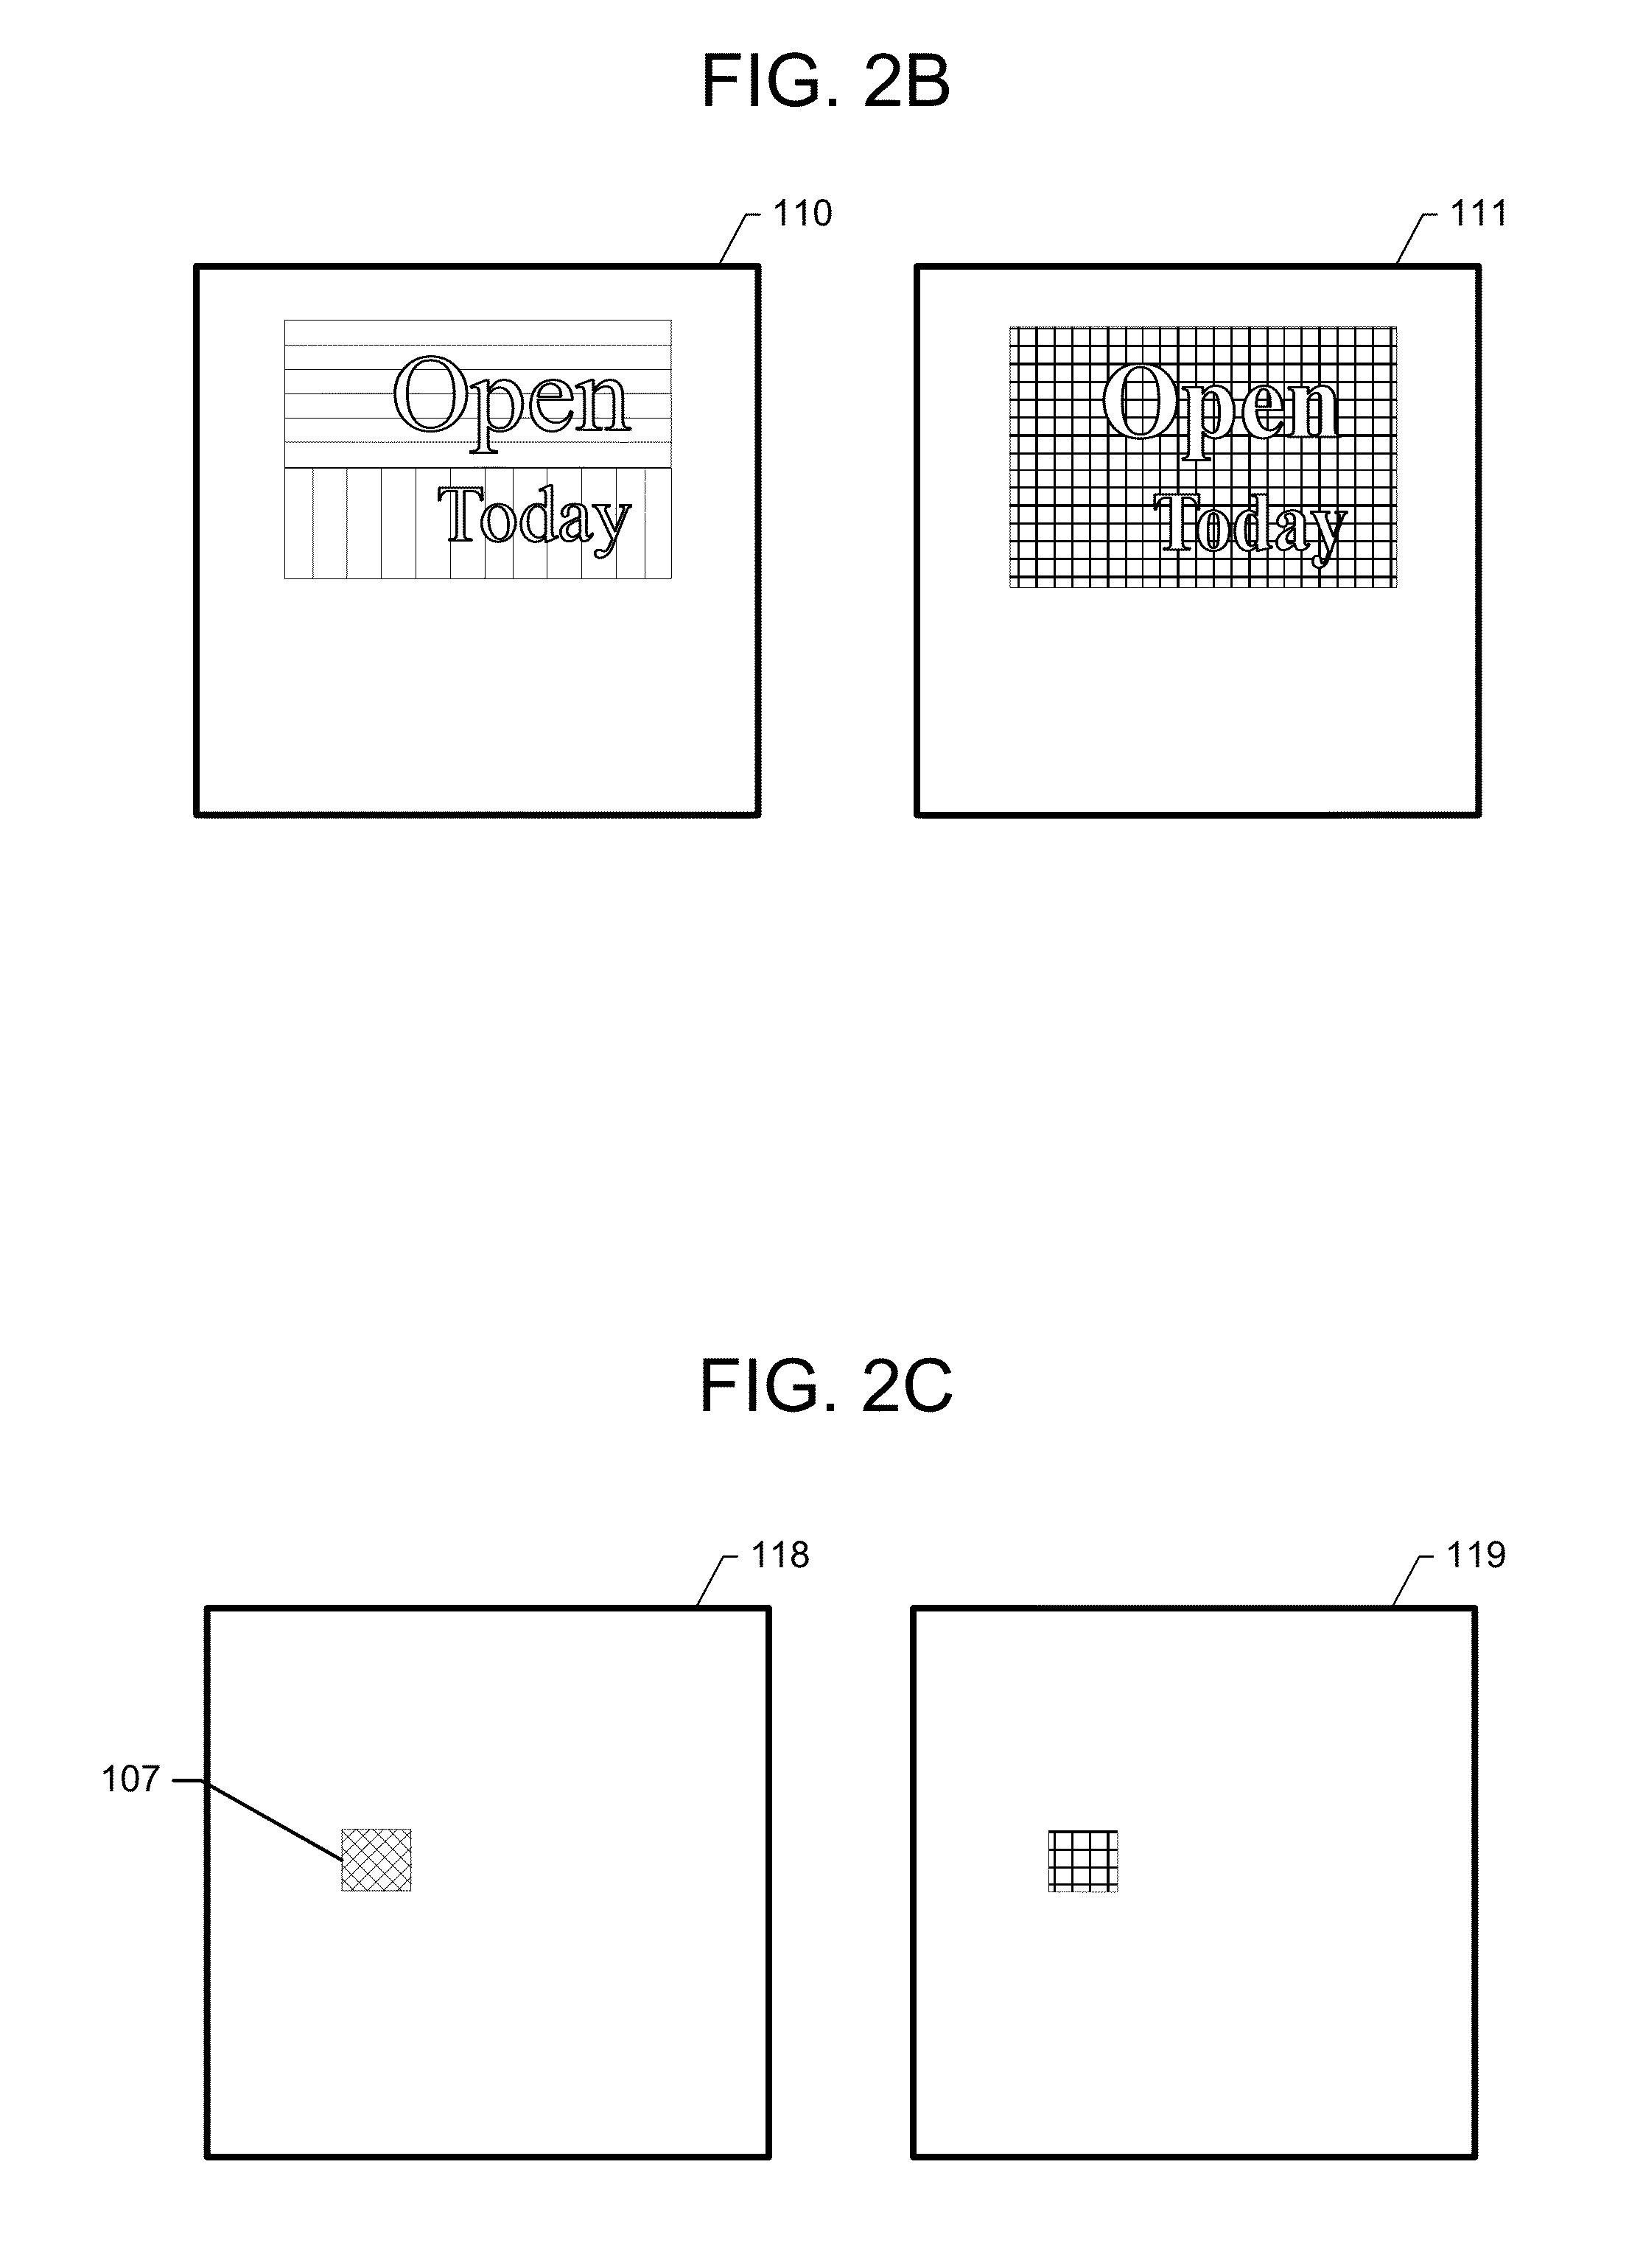 Apparatus and method for encoding an image generated in part by graphical commands